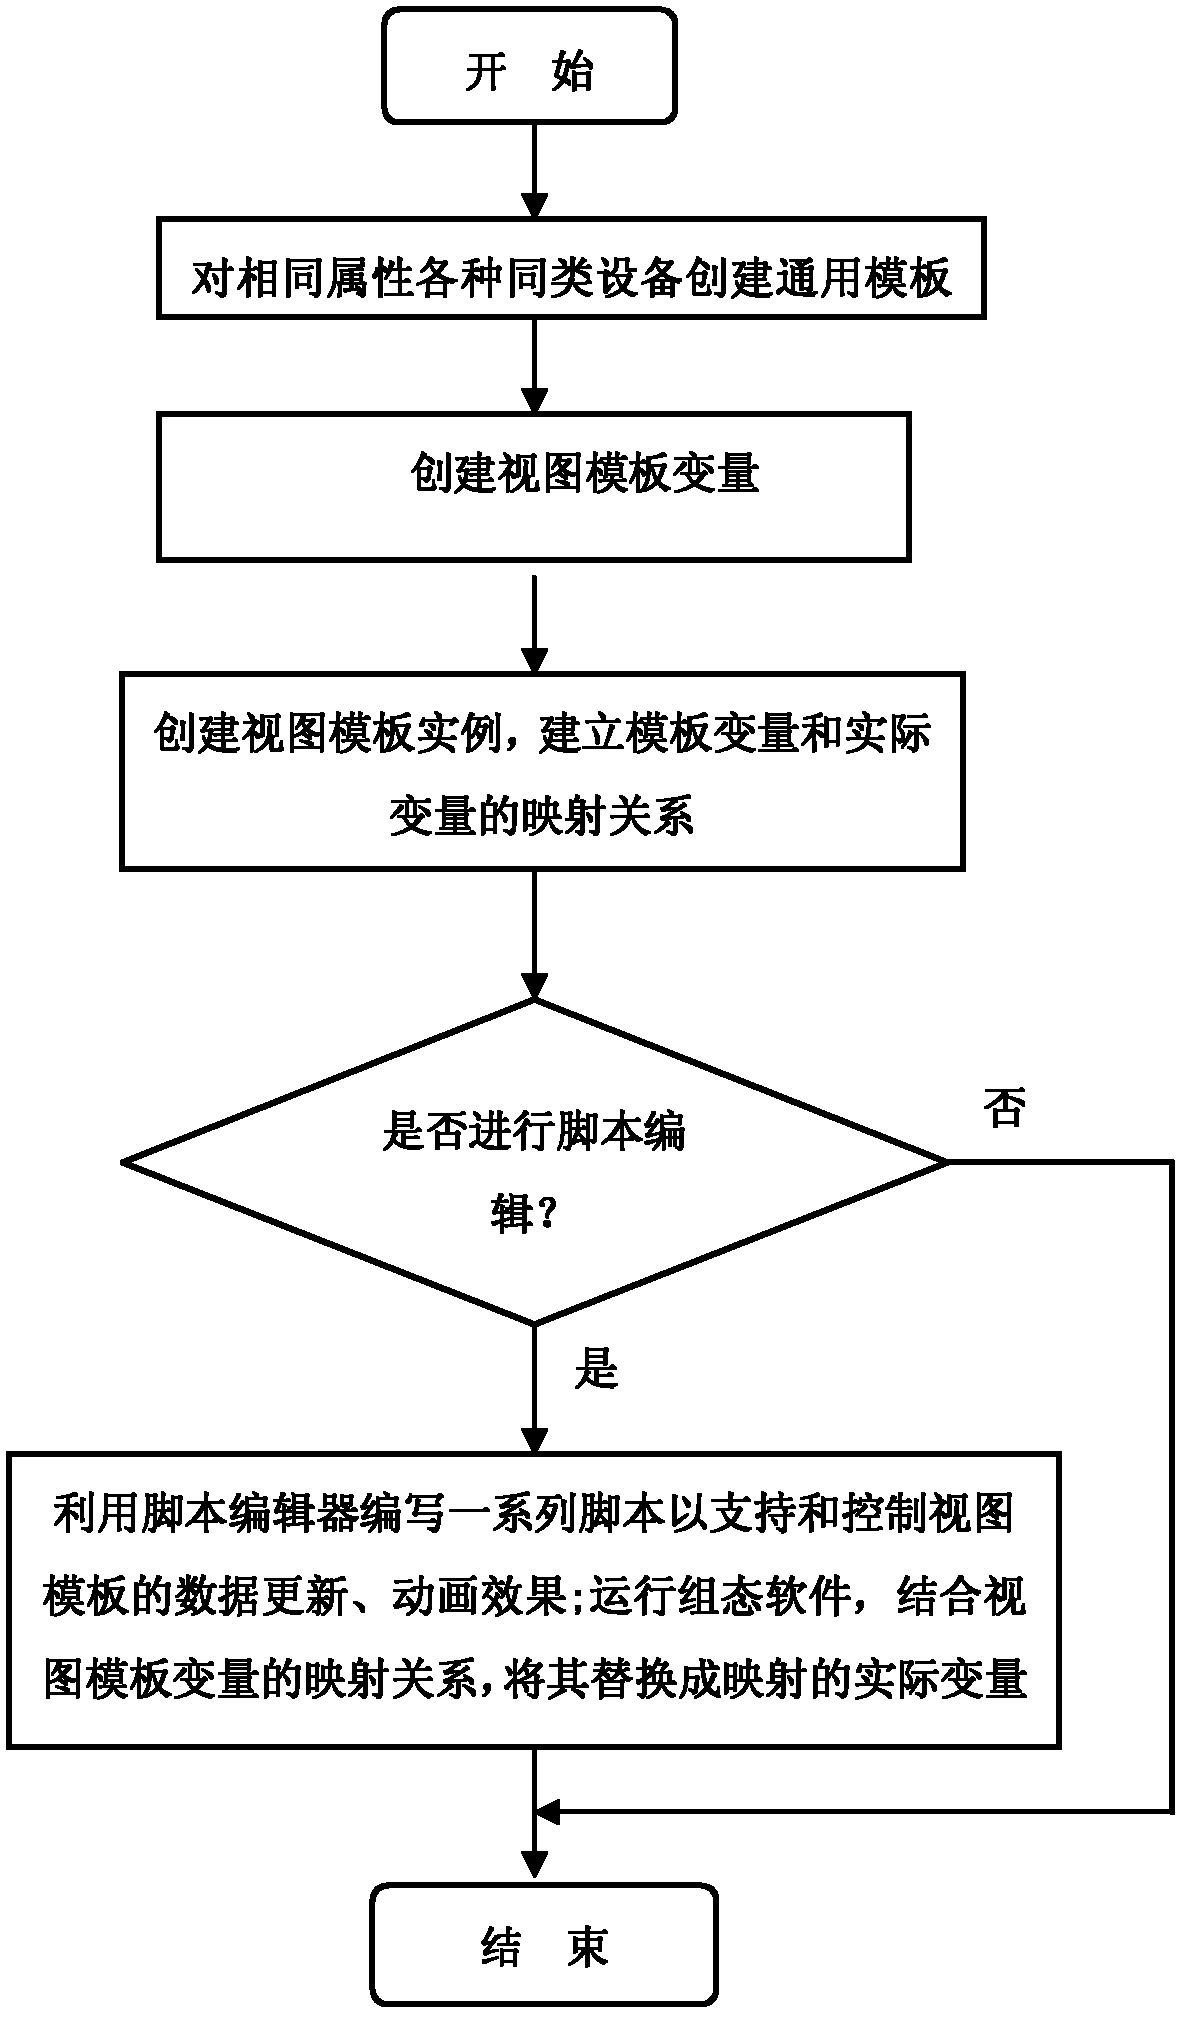 Realization method for dynamic template of support script in monitoring system